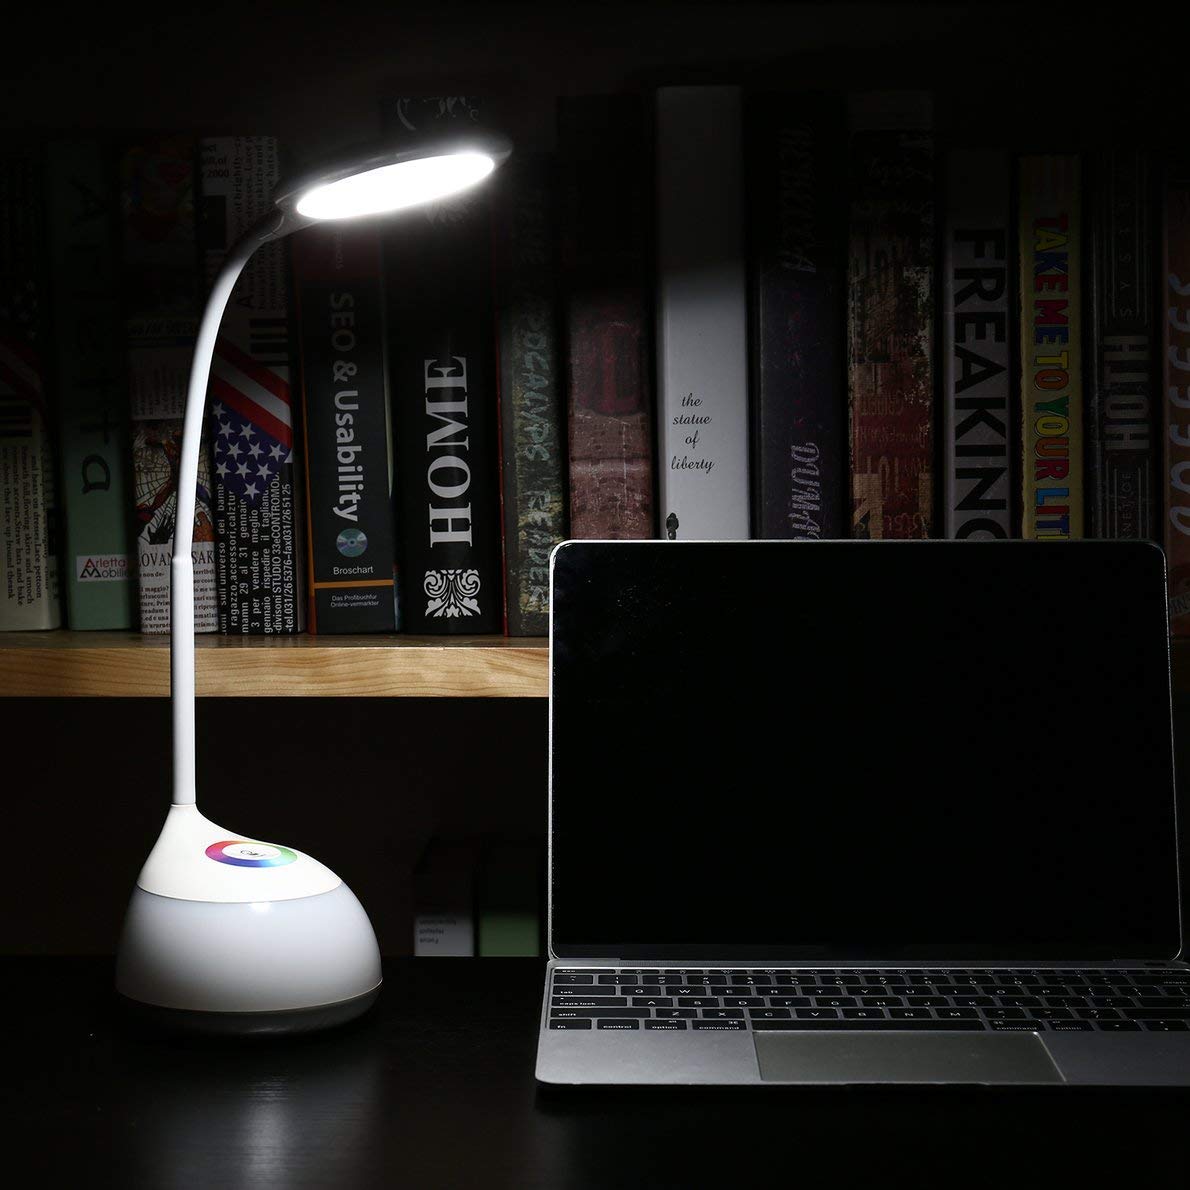 LED Flexible Adjustable Hose Fast Touch Sensor Color Light Lamp freeshipping - GeekGoodies.in